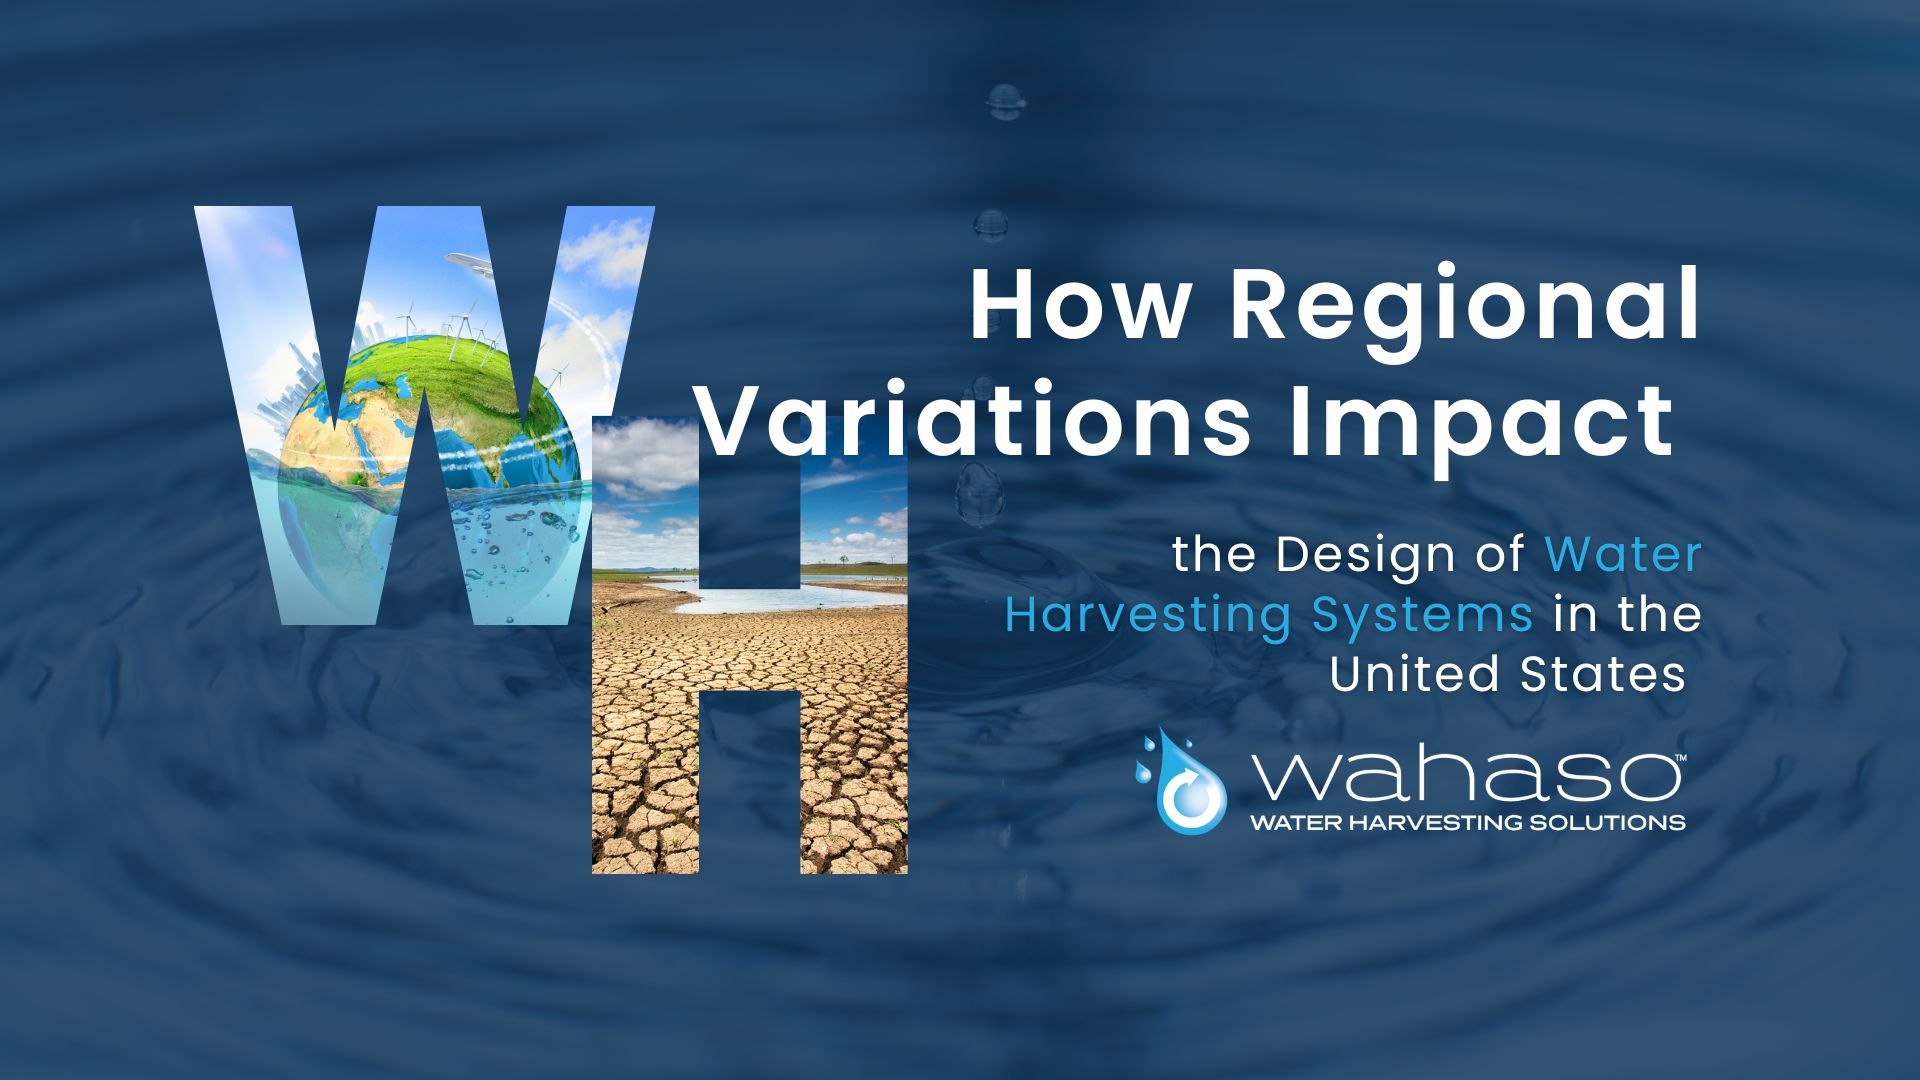 How Regional Variations Impact the Design of Water Harvesting Systems in the US